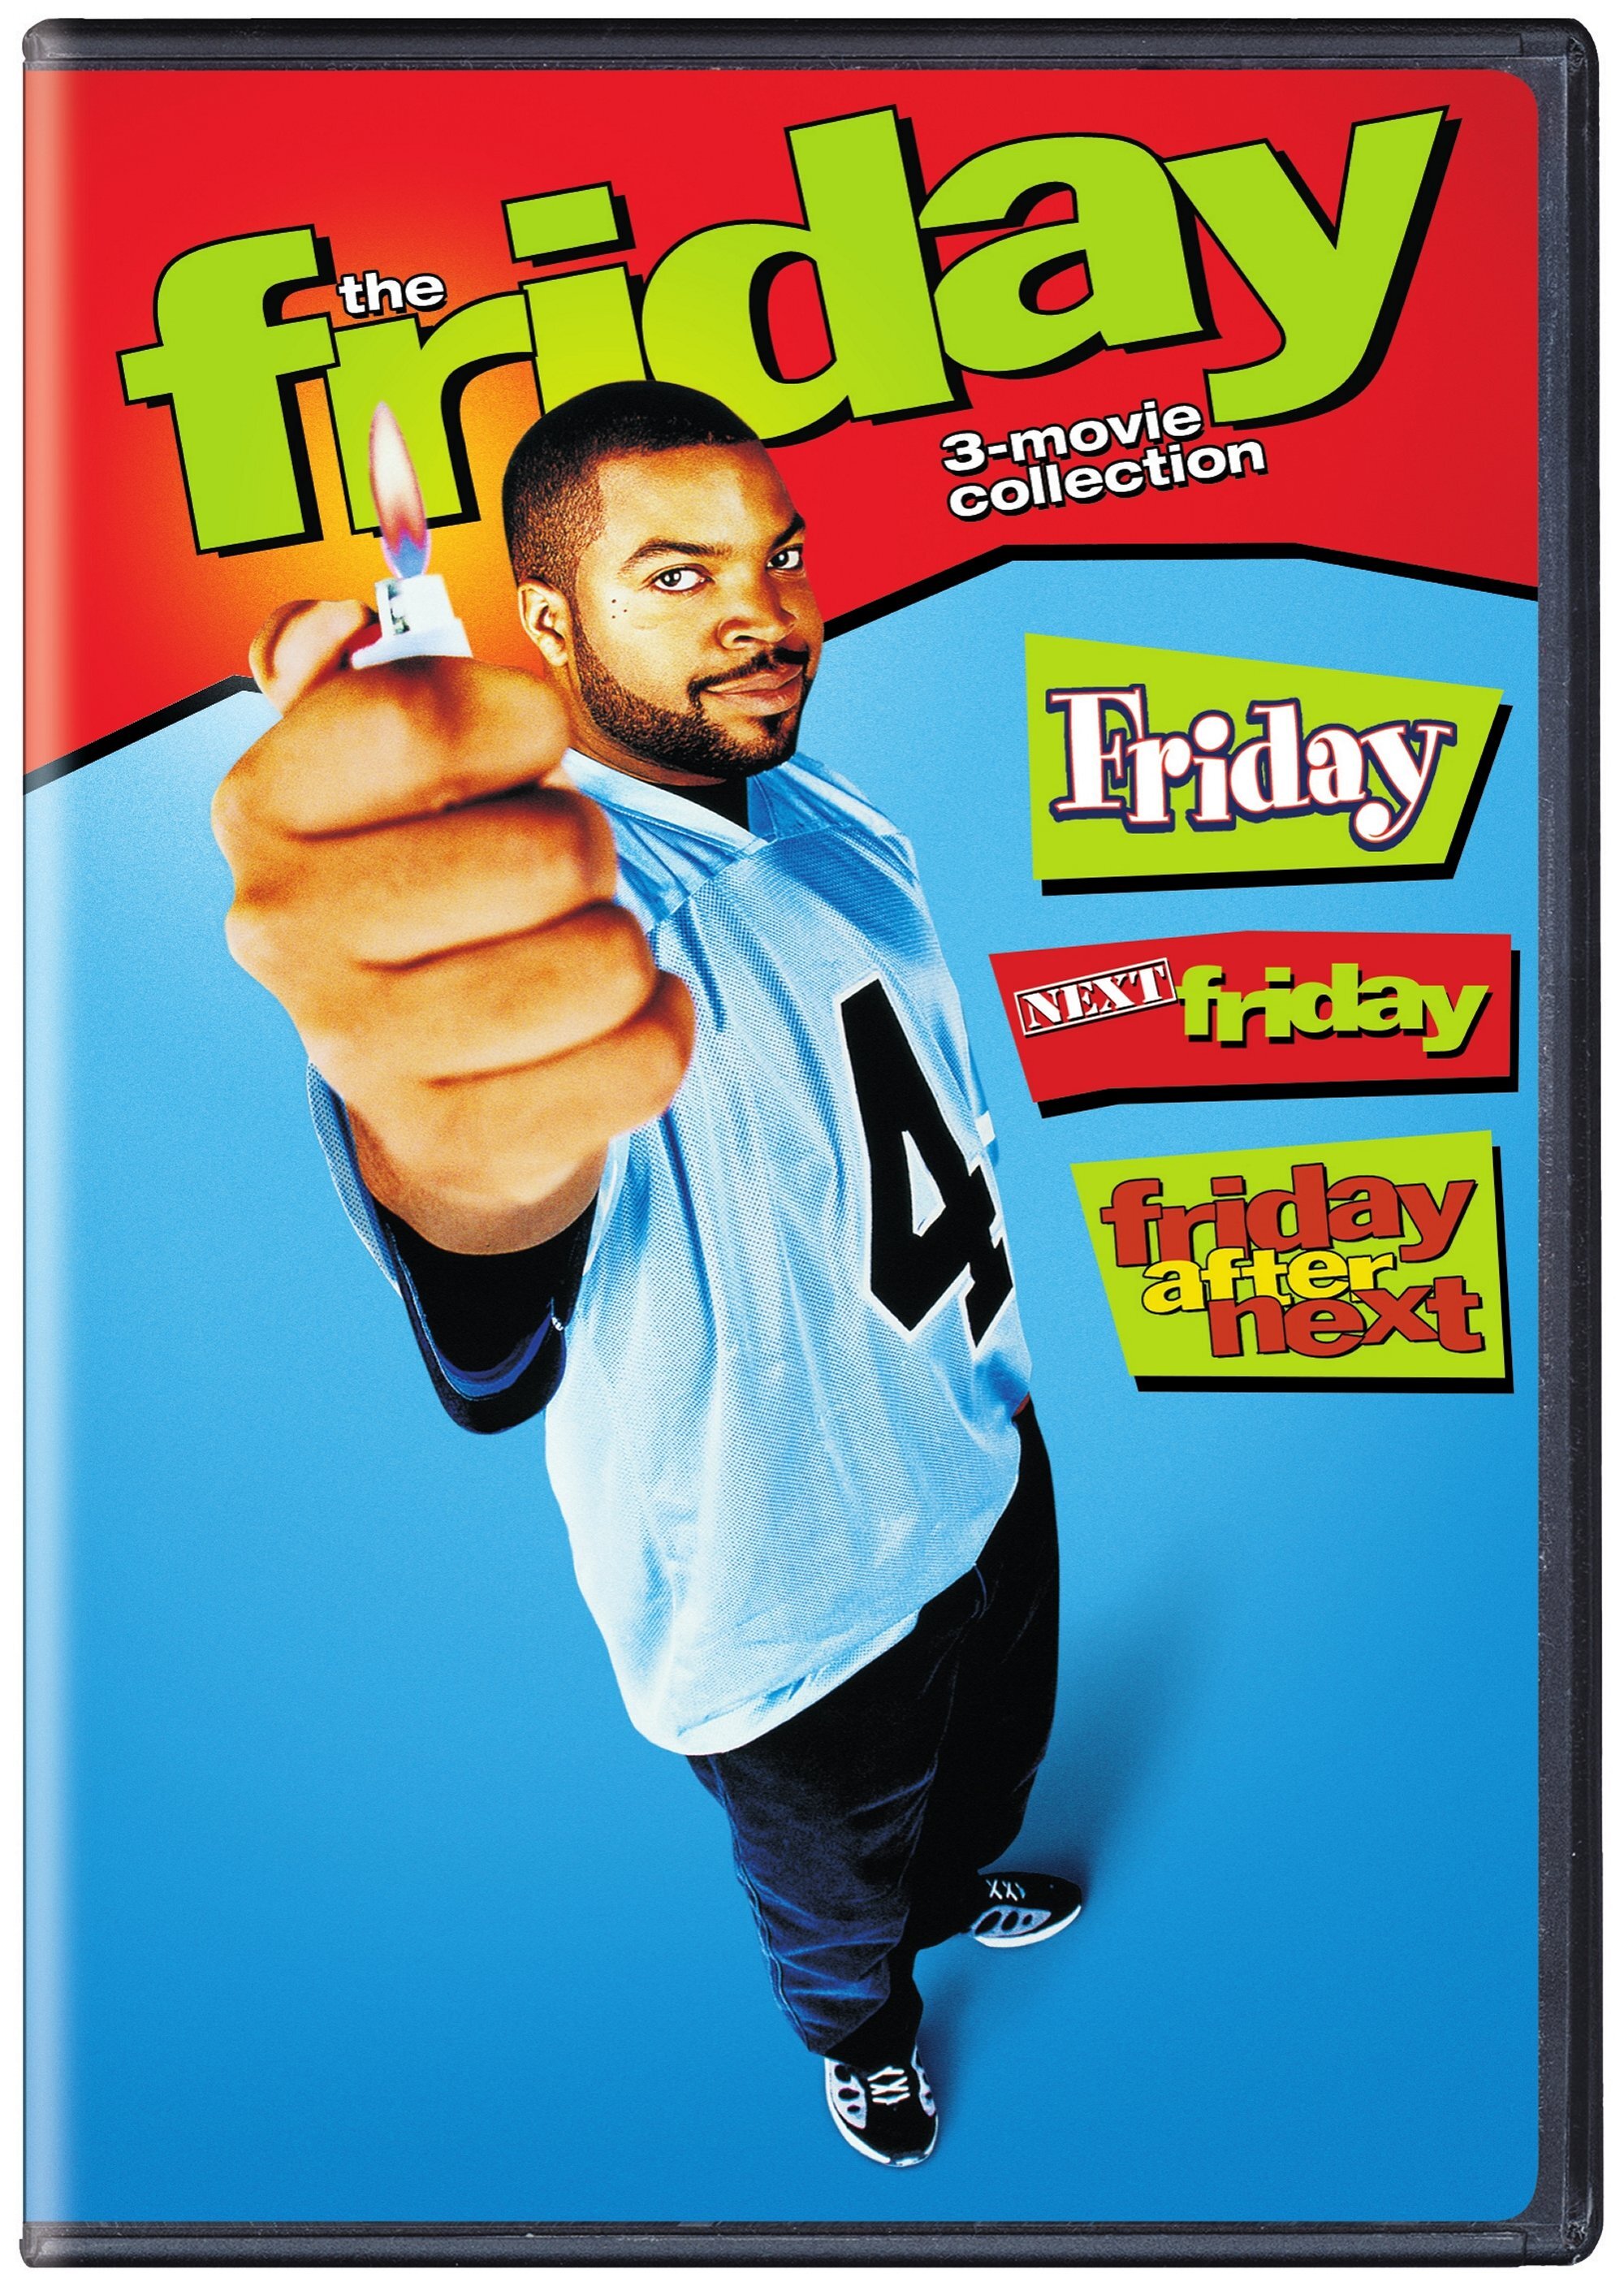 Friday/Next Friday/Friday After Next (DVD Triple Feature) - DVD [ 2002 ]  - Comedy Movies On DVD - Movies On GRUV